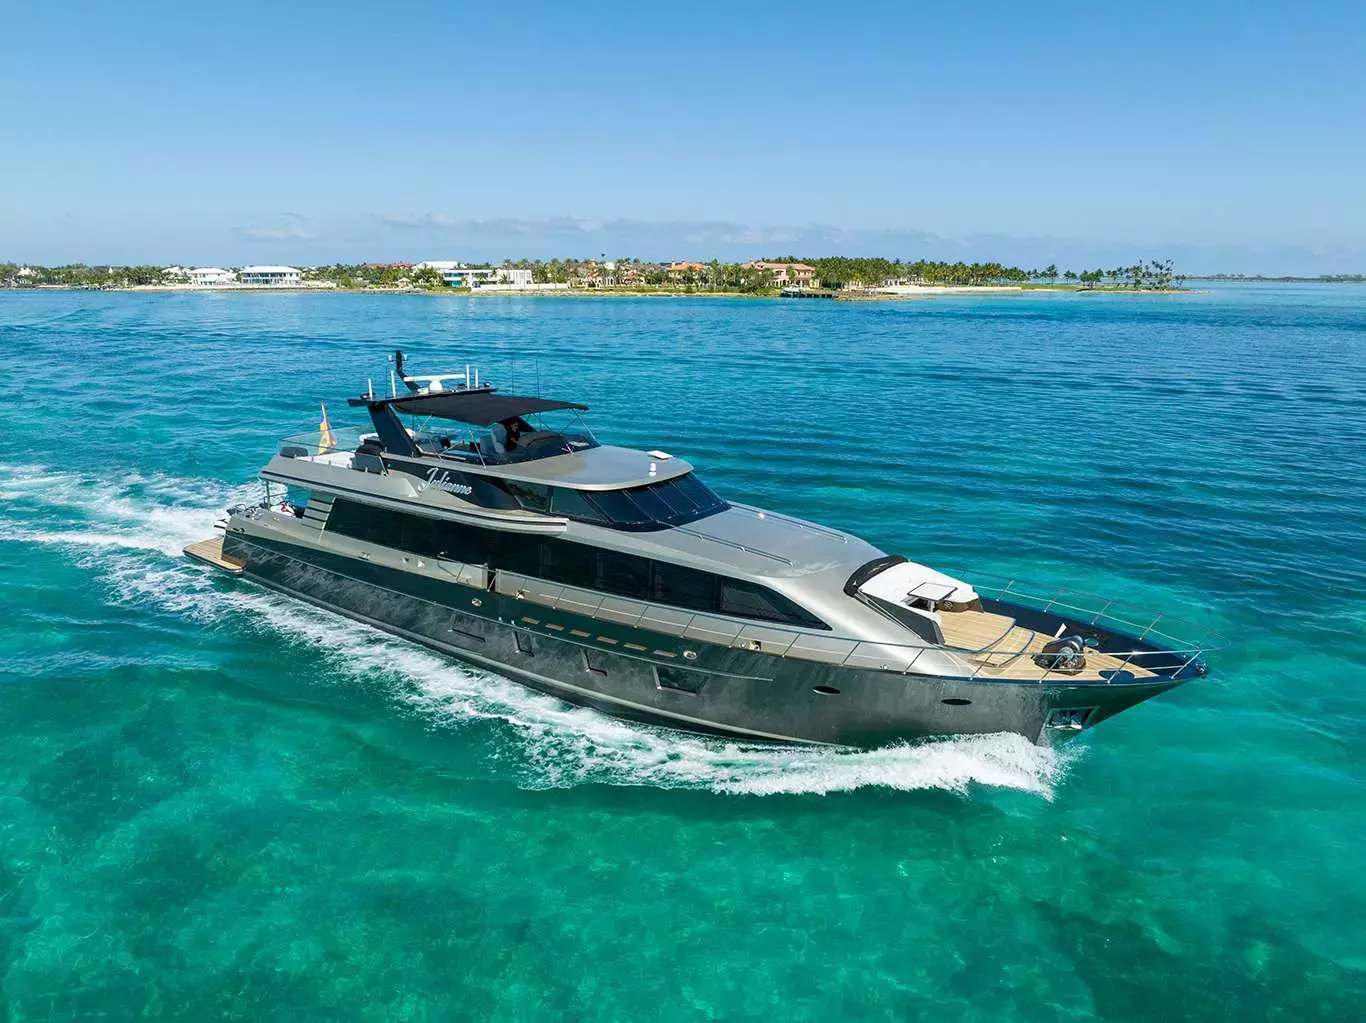 Julianne by Crescent Yachts - Special Offer for a private Motor Yacht Charter in Exuma with a crew